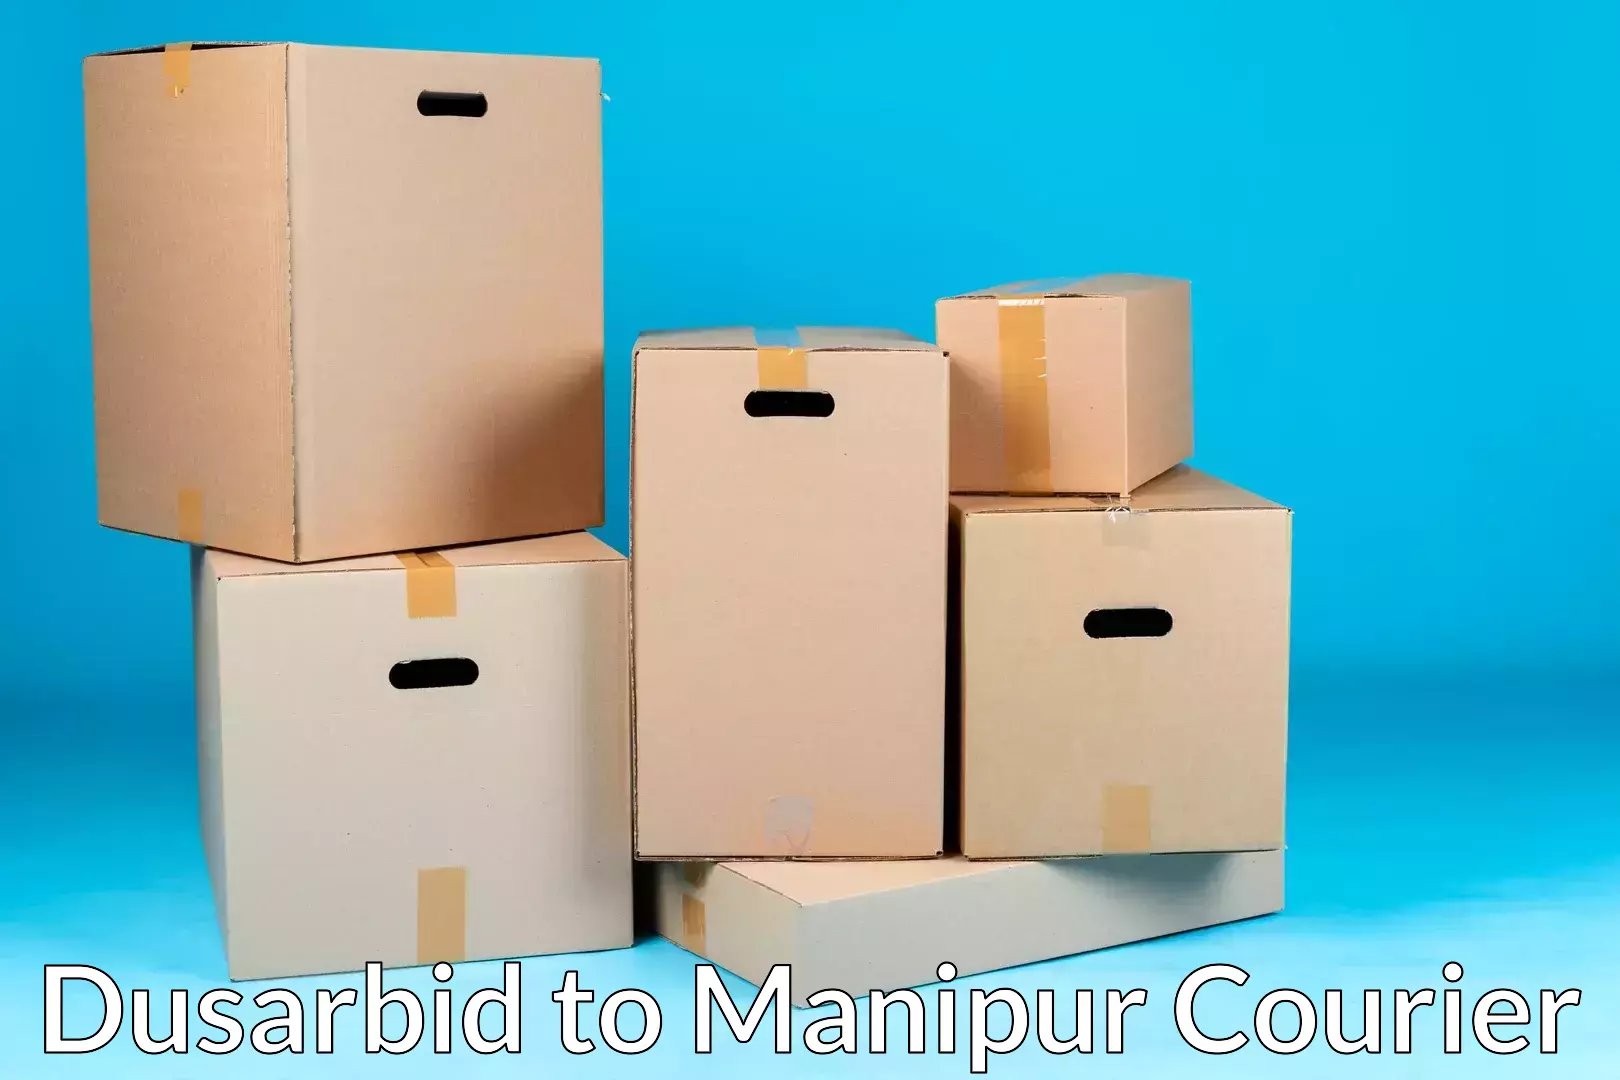 Efficient moving company in Dusarbid to Chandel